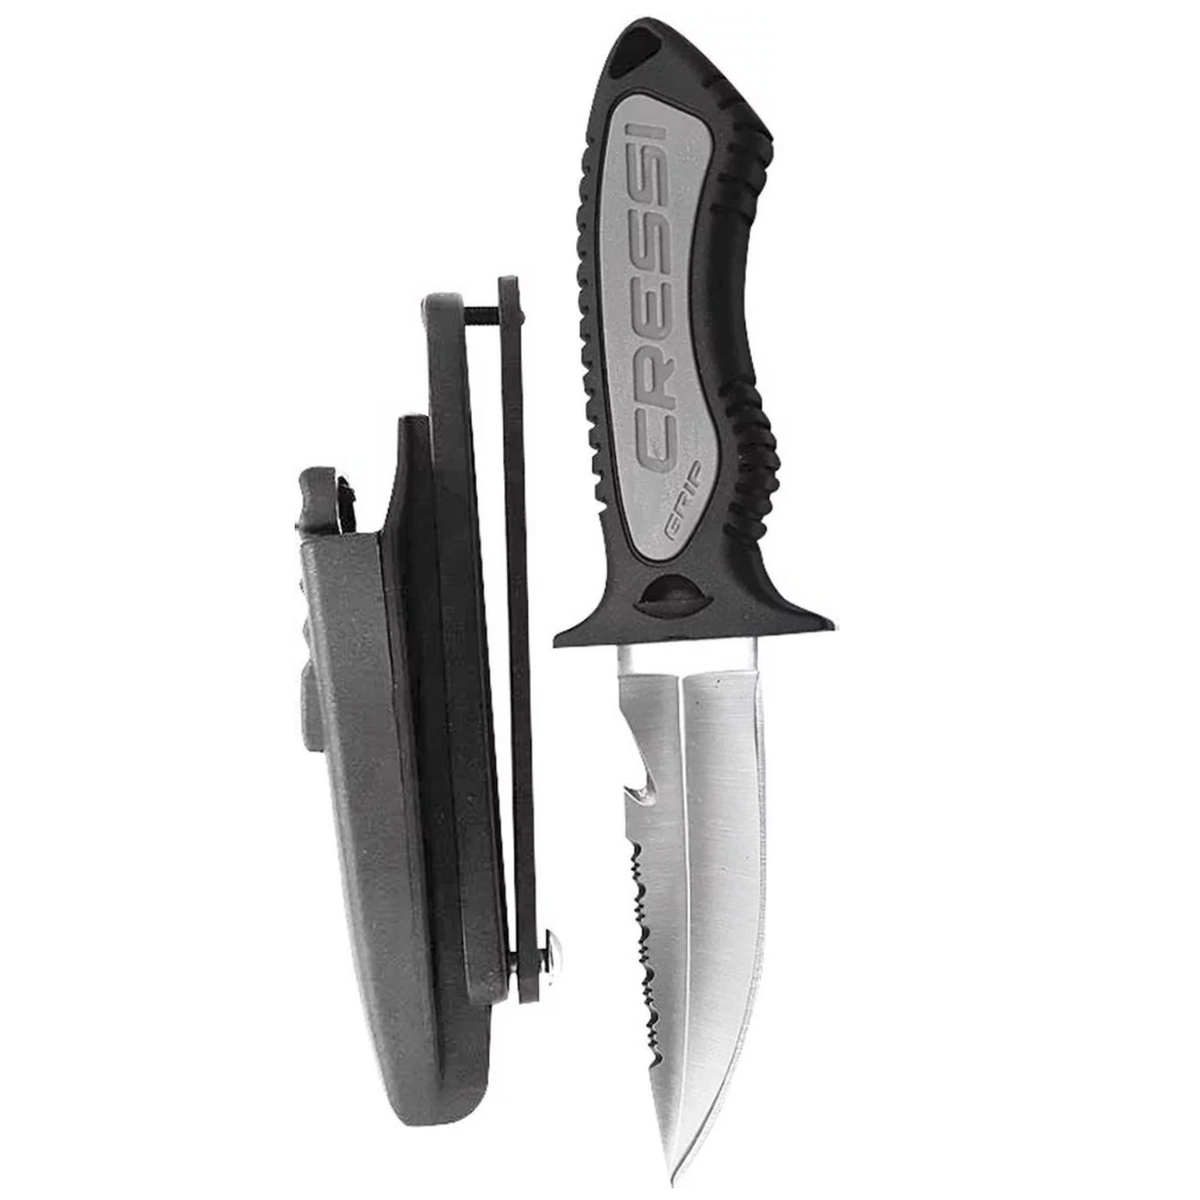 Cressi Grip Spear knife - Outdoor Adventure South West Rocks